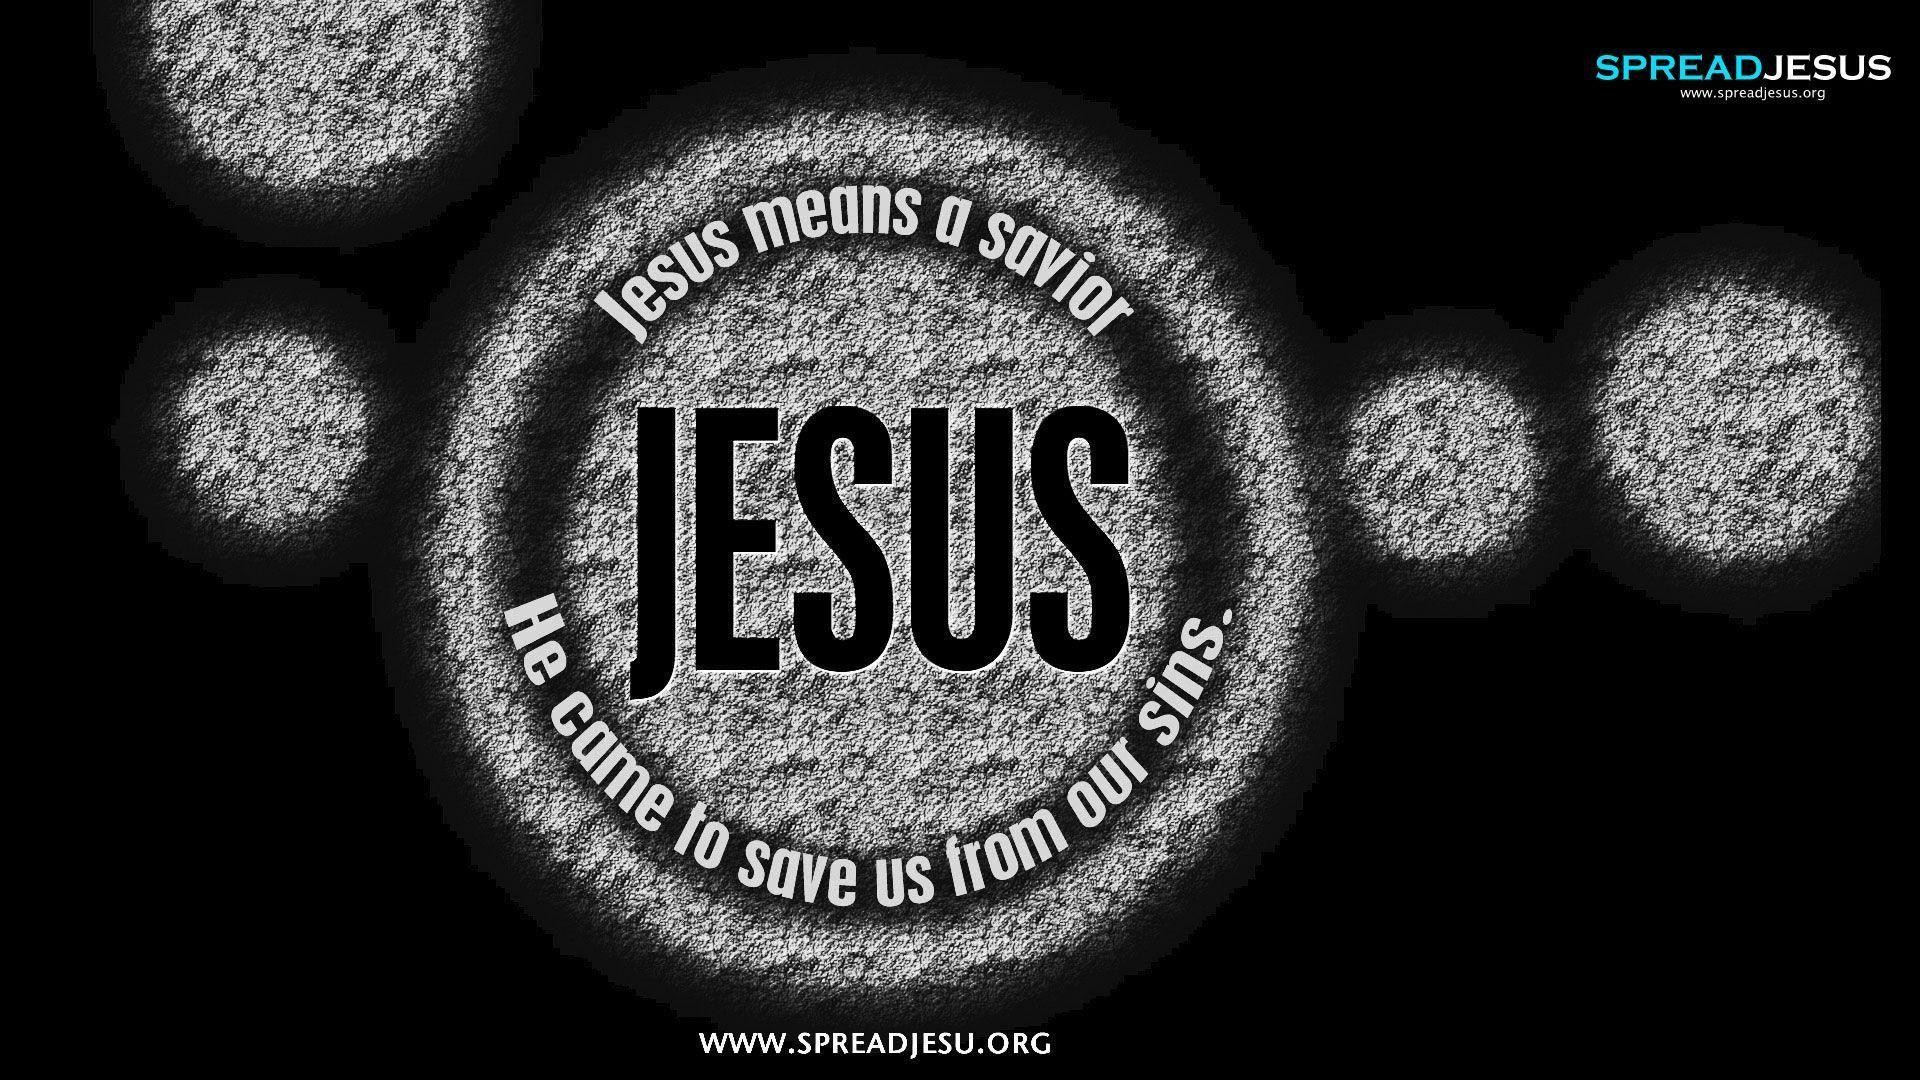 1920x1080 Jesus Means A Savior HD wallpapers pack Free HD Wallpapers pack .